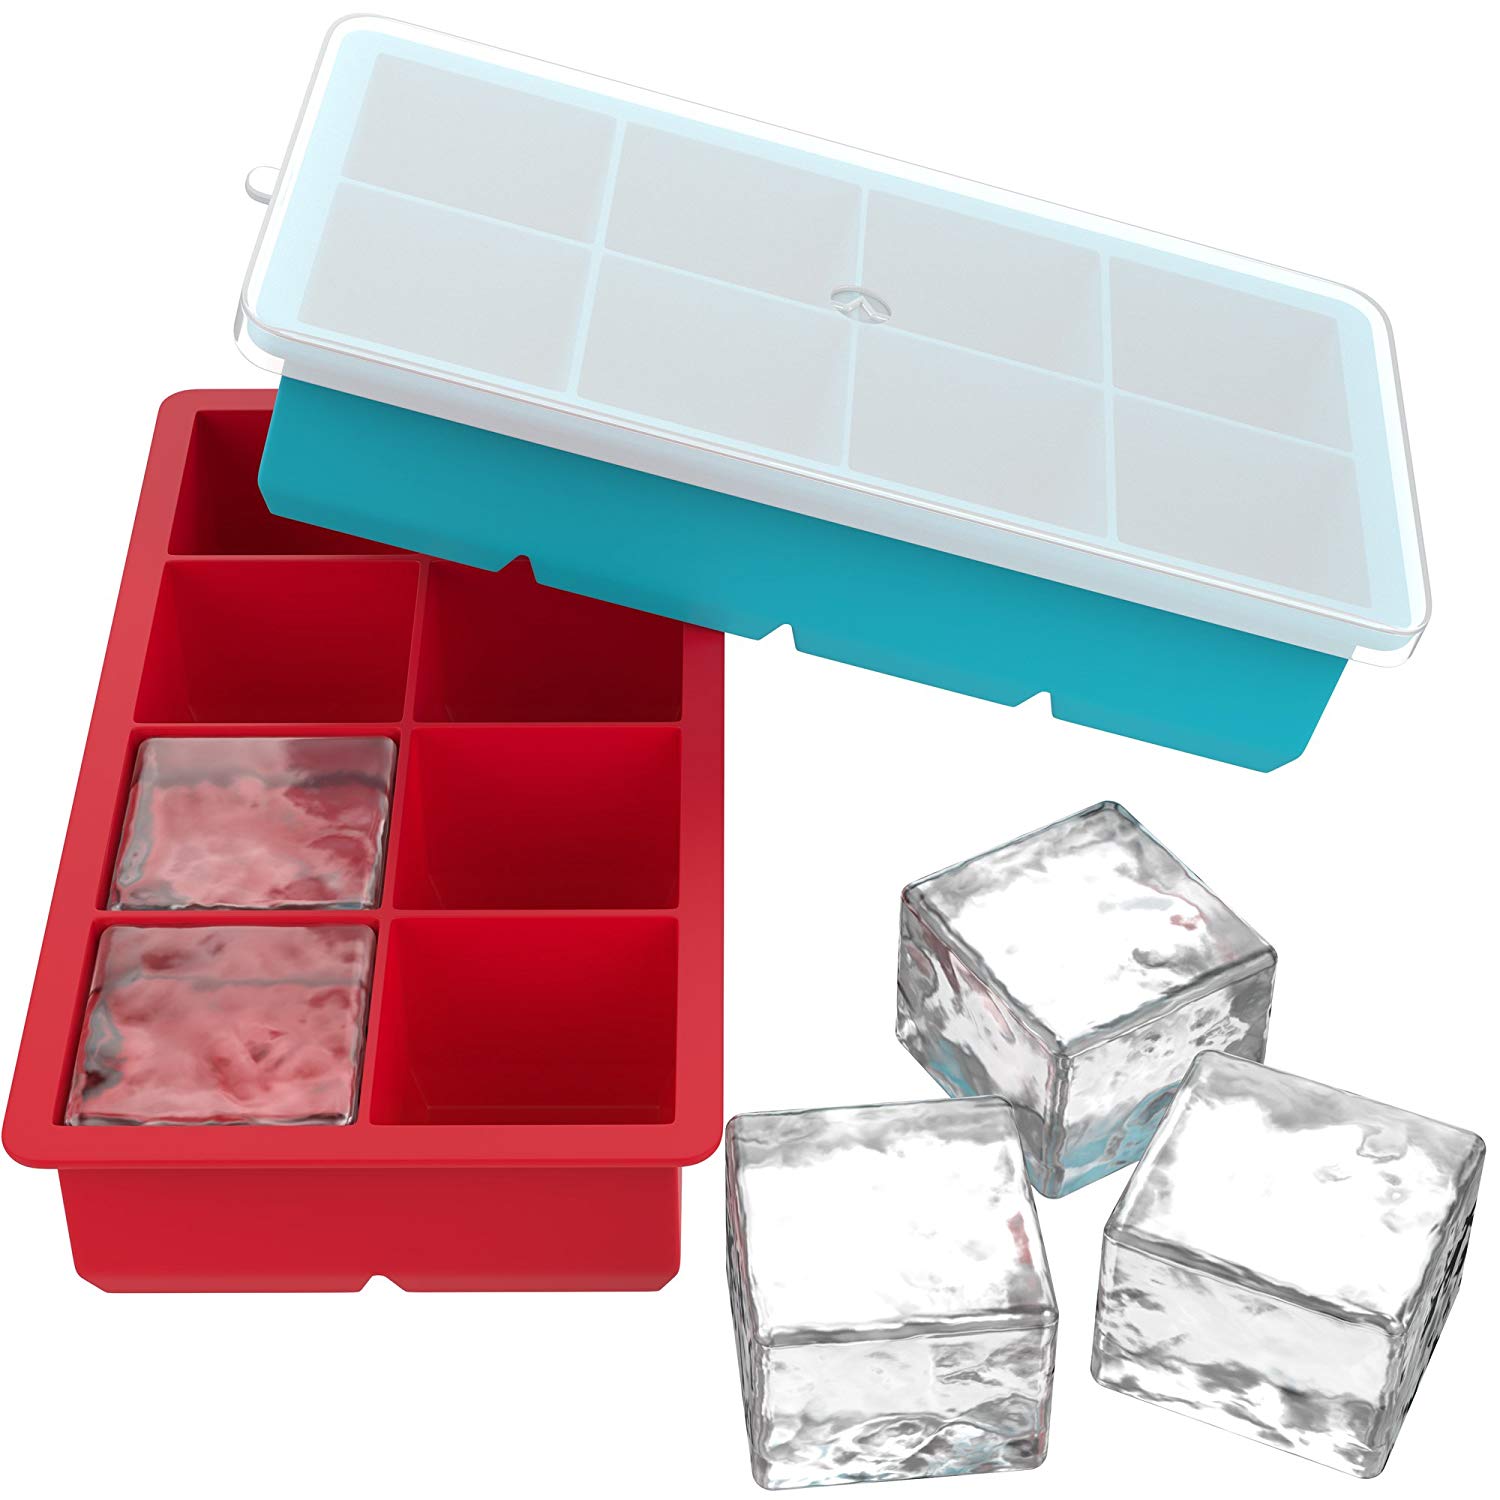 Easy Release Soft Silicone Ice Molds Odor Free /& No Aftertaste Perfect for Large or Small Ice Cubes 24 Cube Silicone Ice Cube Trays 2 Pack of 12 Ice Cubes Trays